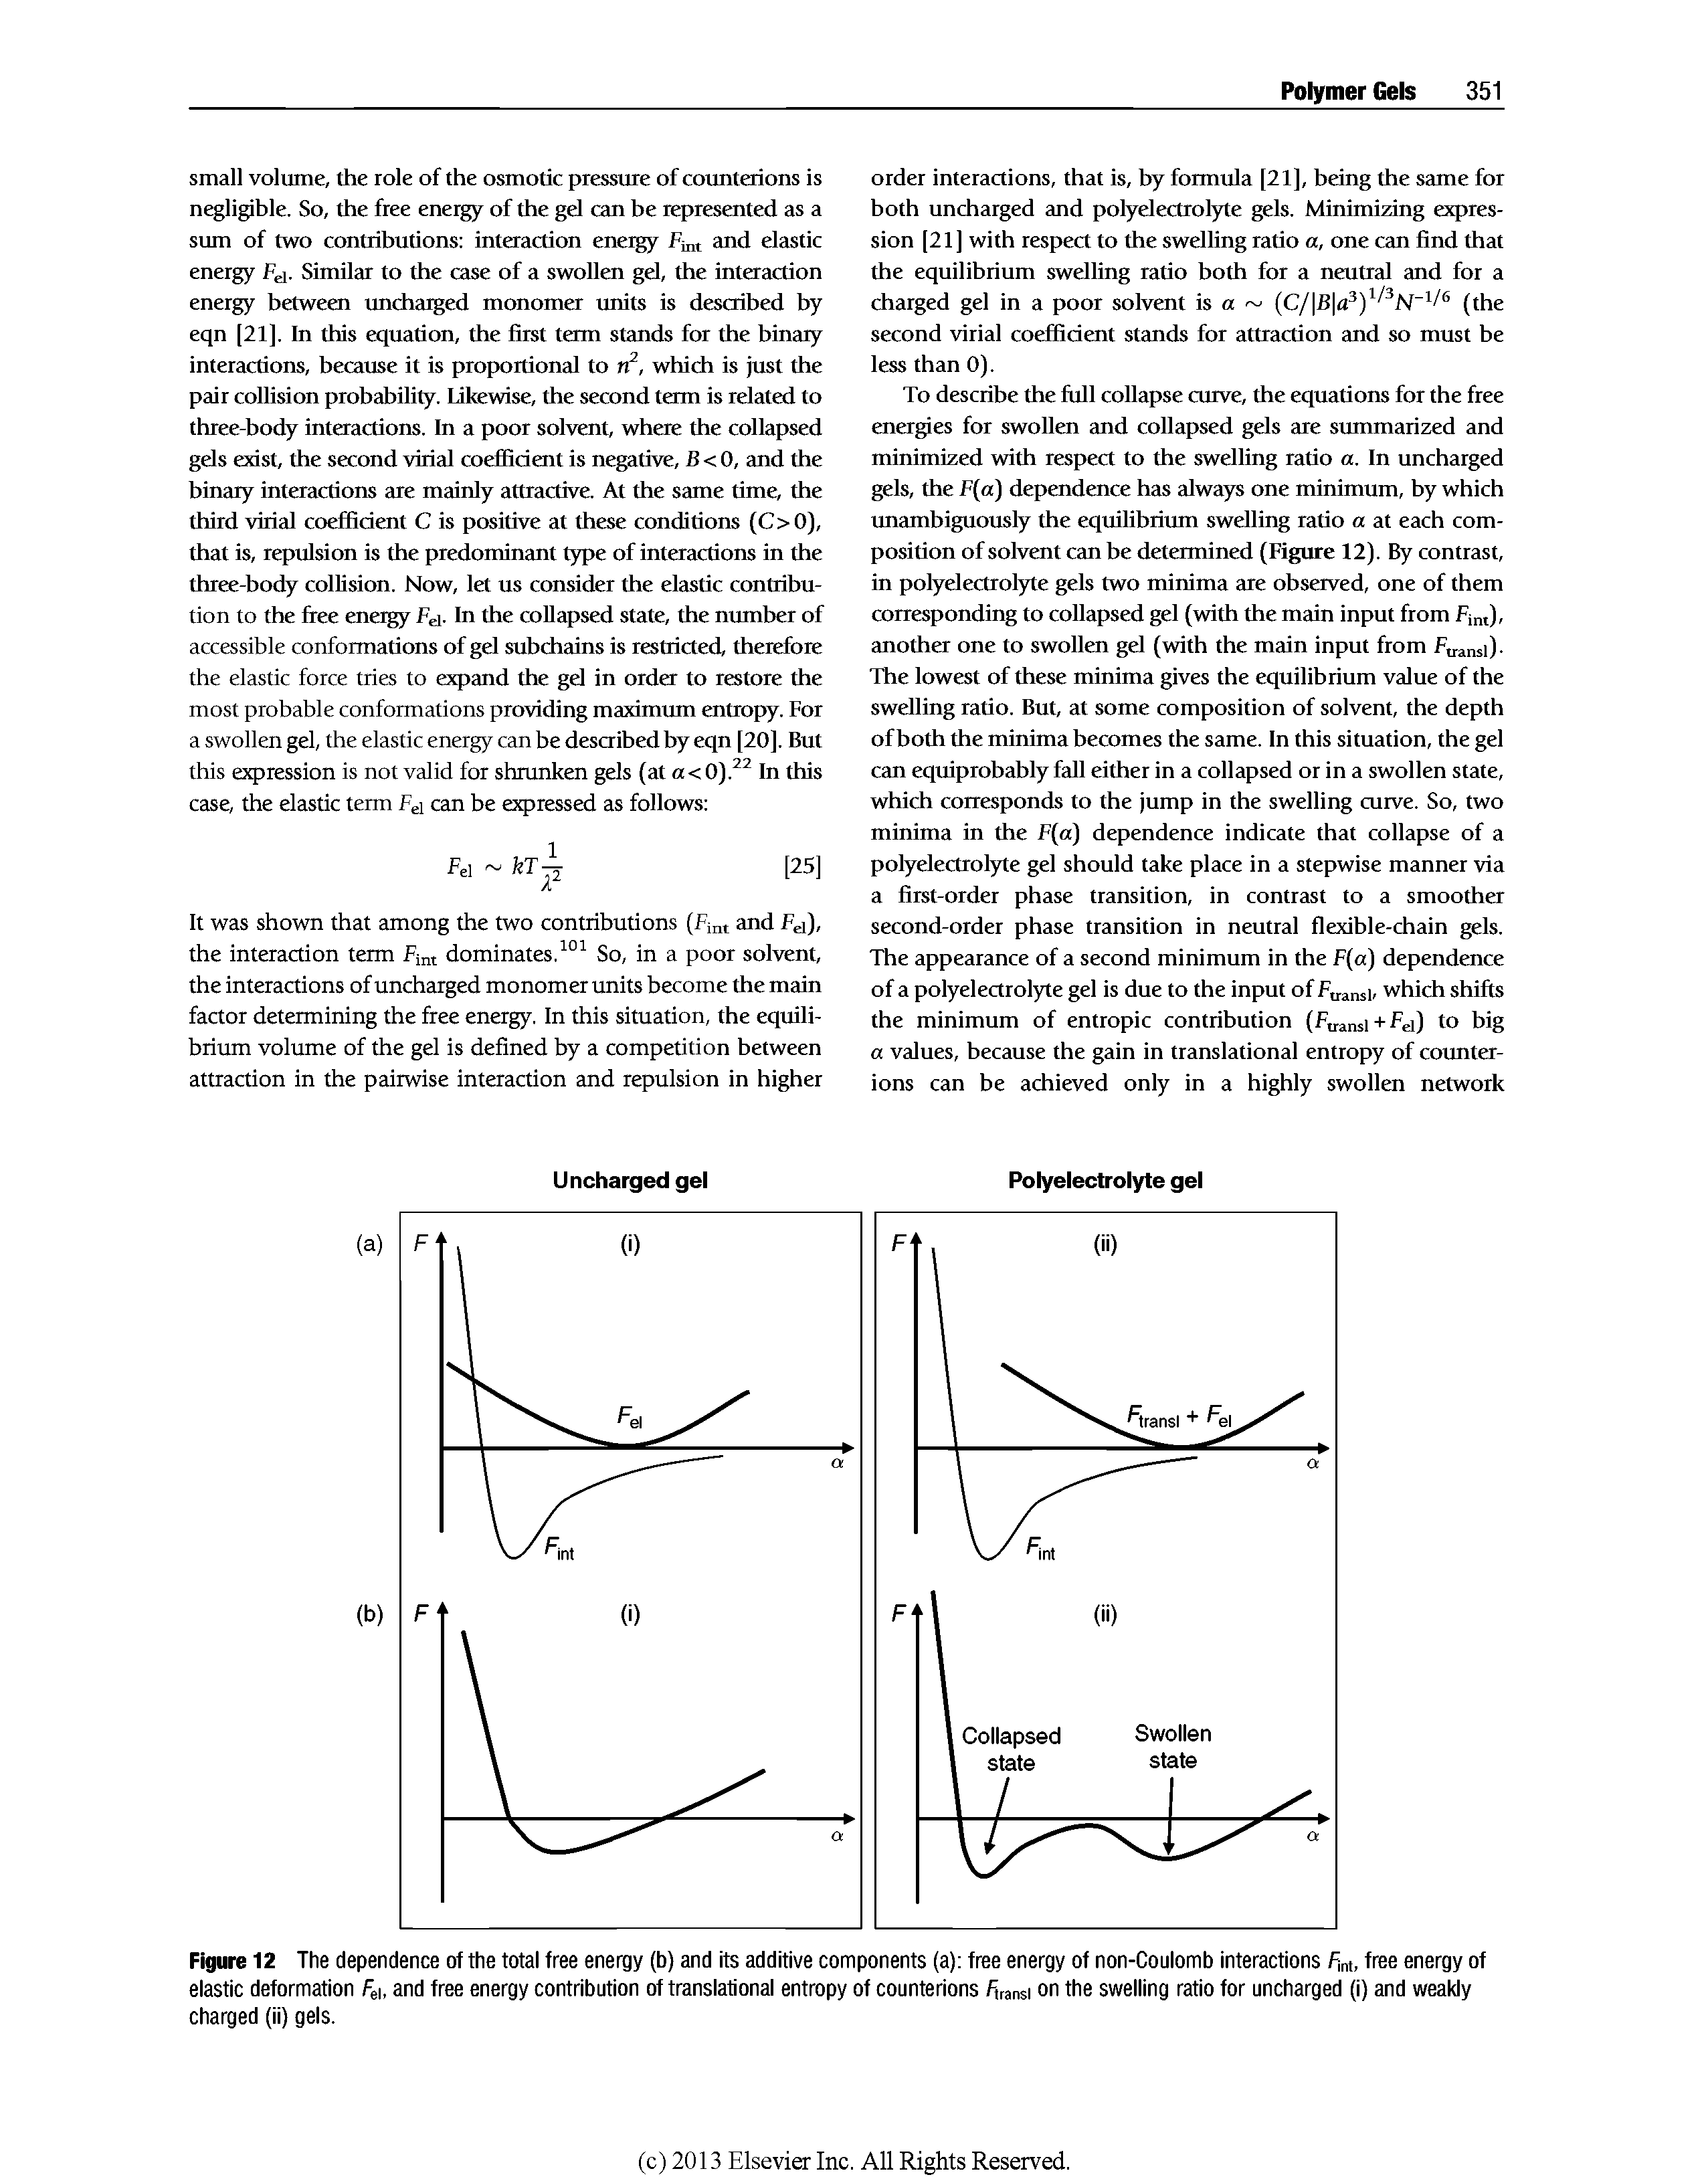 Figure 12 The dependence of the total free energy (b) and its additive components (a) free energy of non-Coulomb interactions F,d, free energy of elastic deformation Pei, and free energy contribution of translational entropy of counterions firansi on the swelling ratio for uncharged (i) and weakly charged (ii) gels.